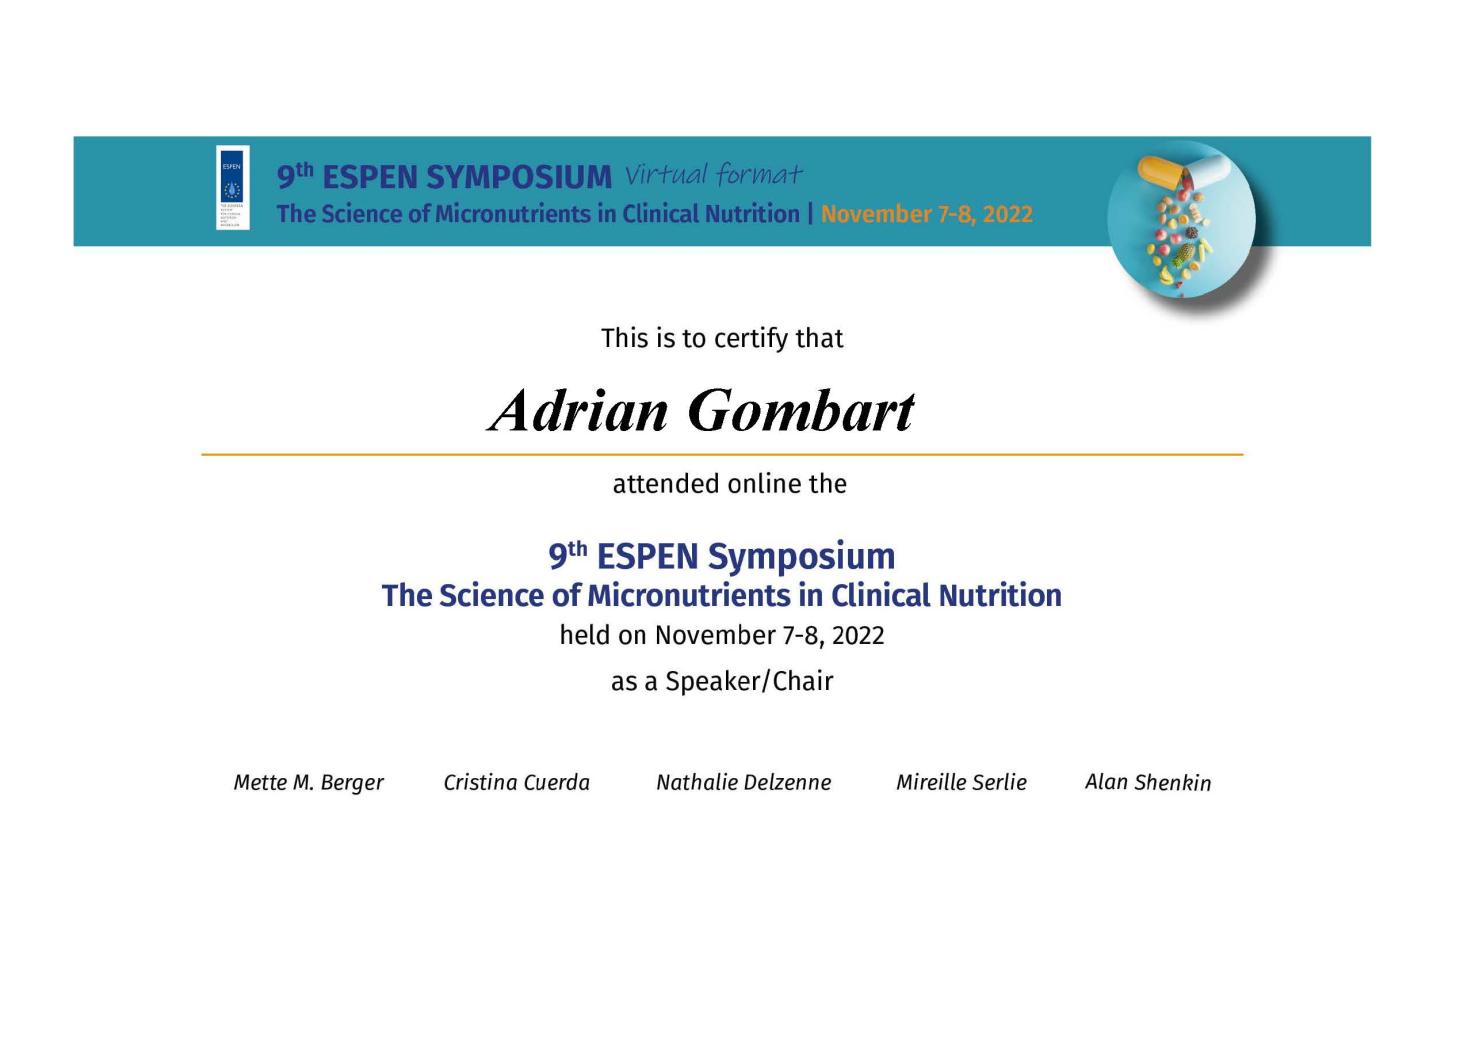 Attendance award for Adrian Gombart for participating in the ESPEN Symposium.